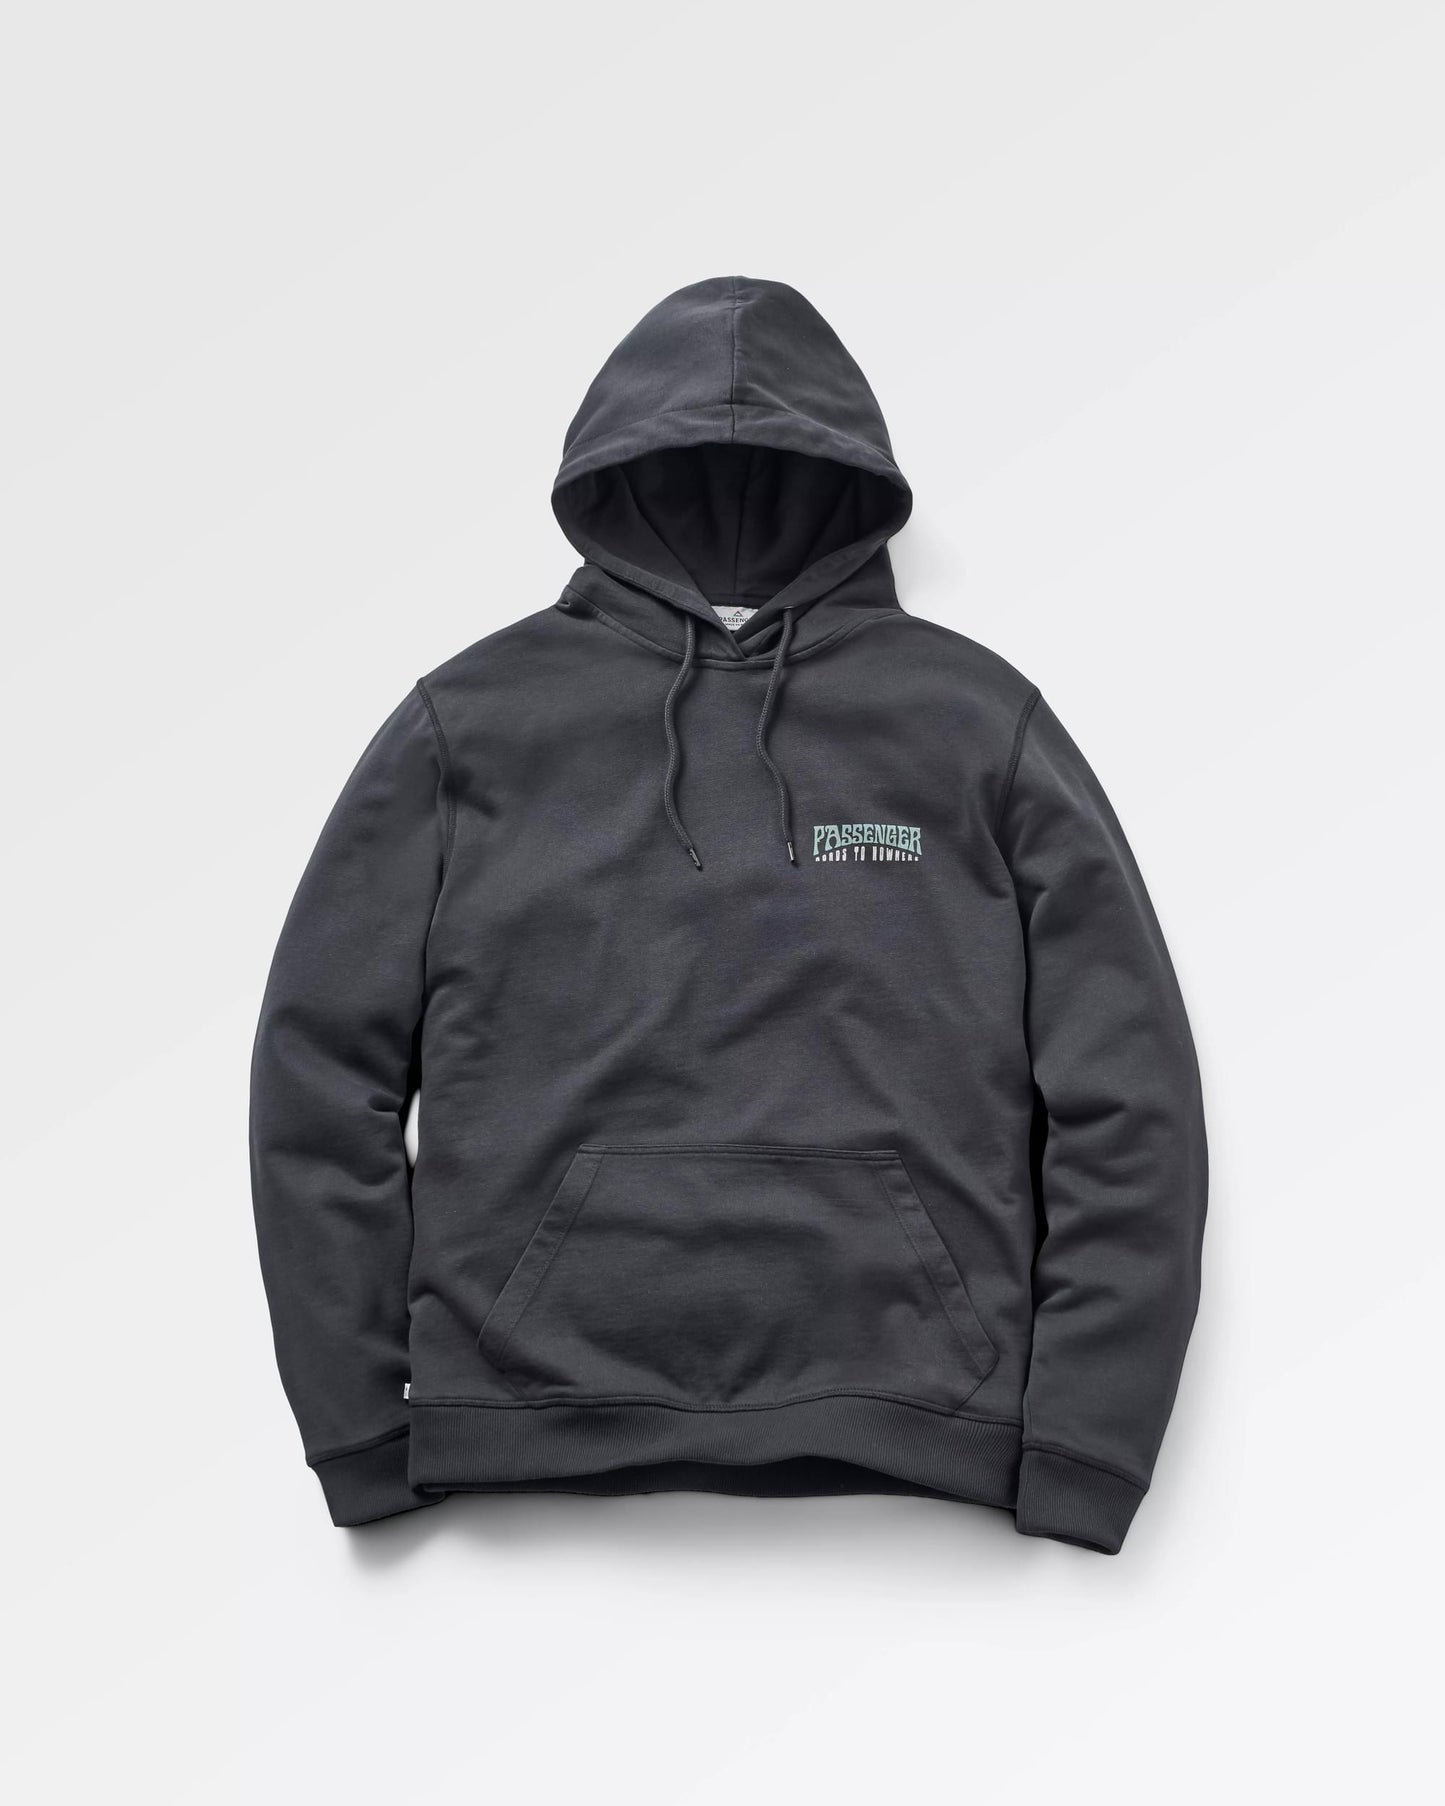 Decade Recycled Cotton Hoodie - Black